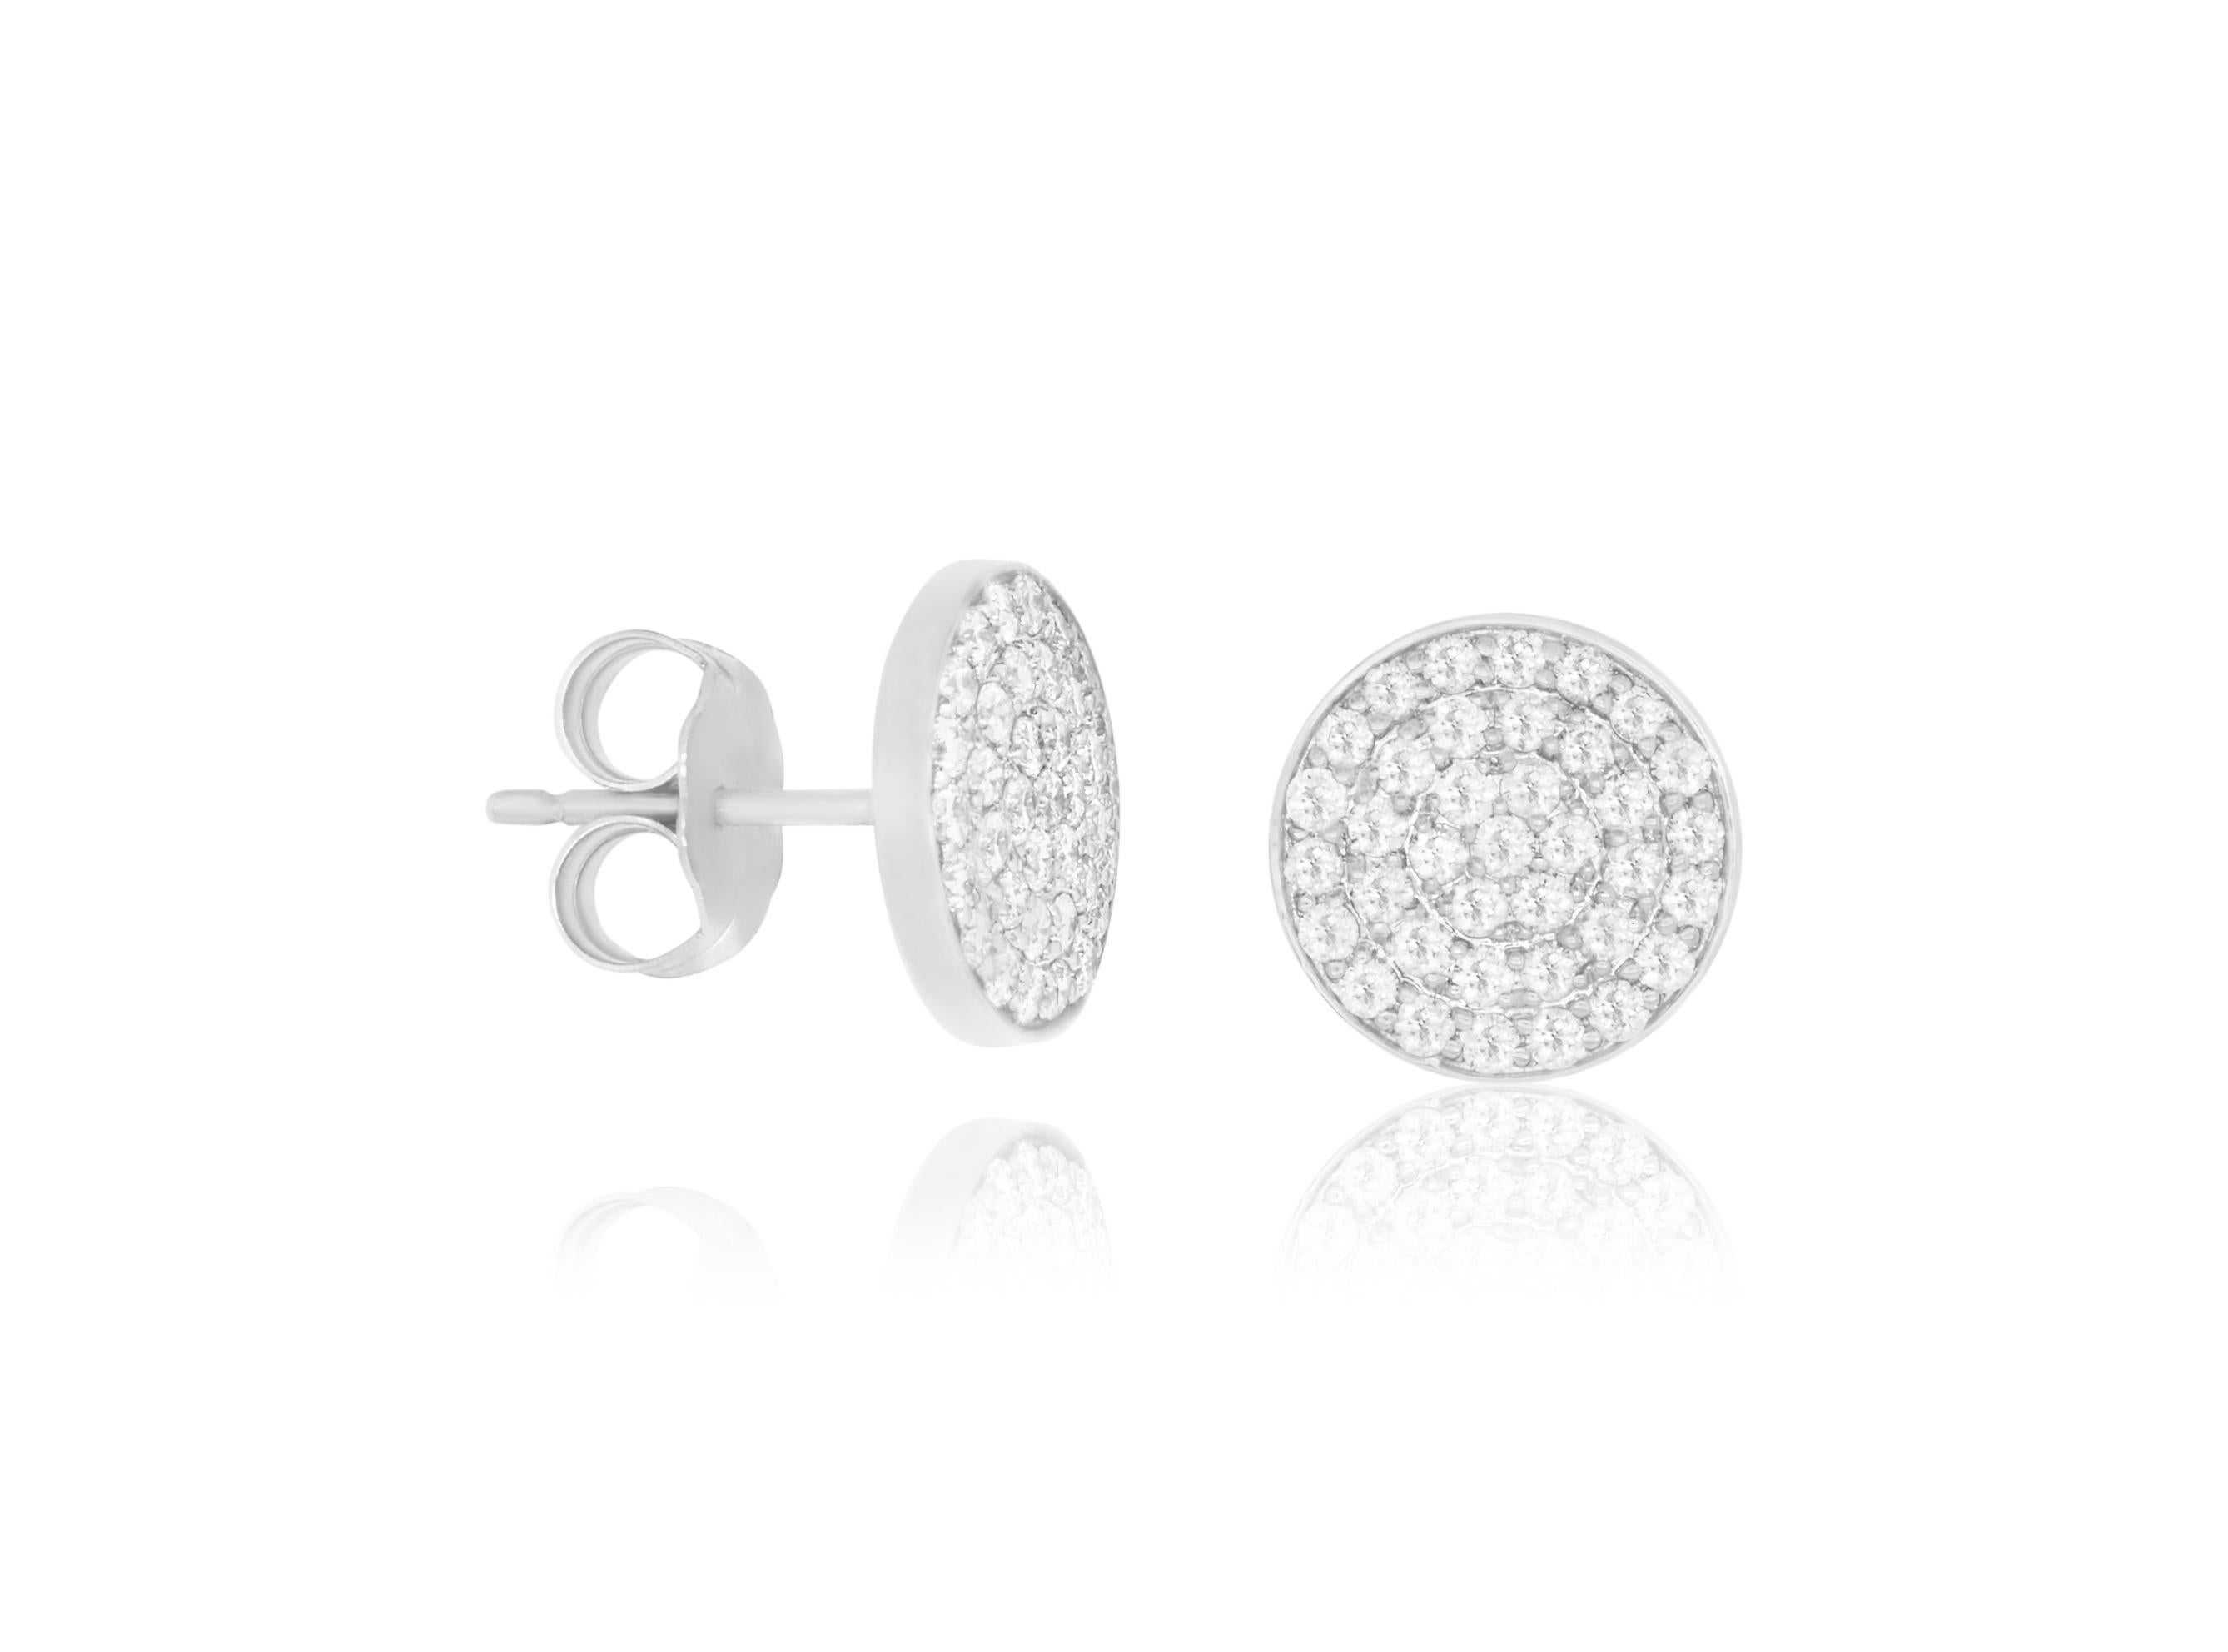 A spin on the classic diamond earrings! These diamond disc studs feature 74 diamonds and sparkle and shine at 0.60 carats. 

Material: 14k White Gold 
Stone Details: 74 Brilliant Round Diamonds at 0.60 Carats

Fine one-of-a kind craftsmanship meets